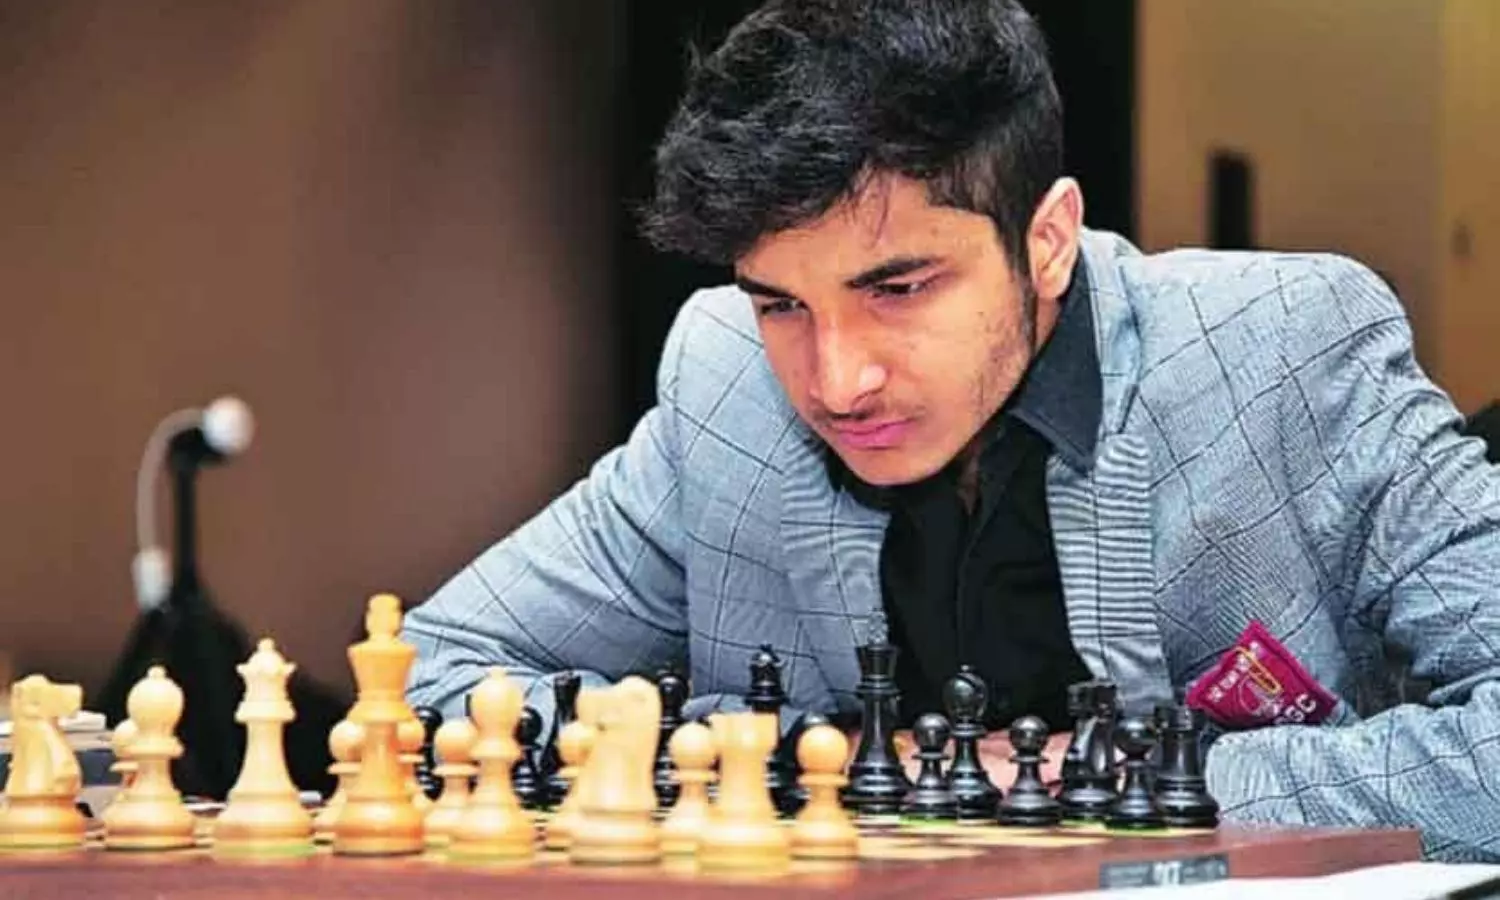 Indian GM Vidit Gujrathi scores 2 wins, women players stutter in Asian Games  chess